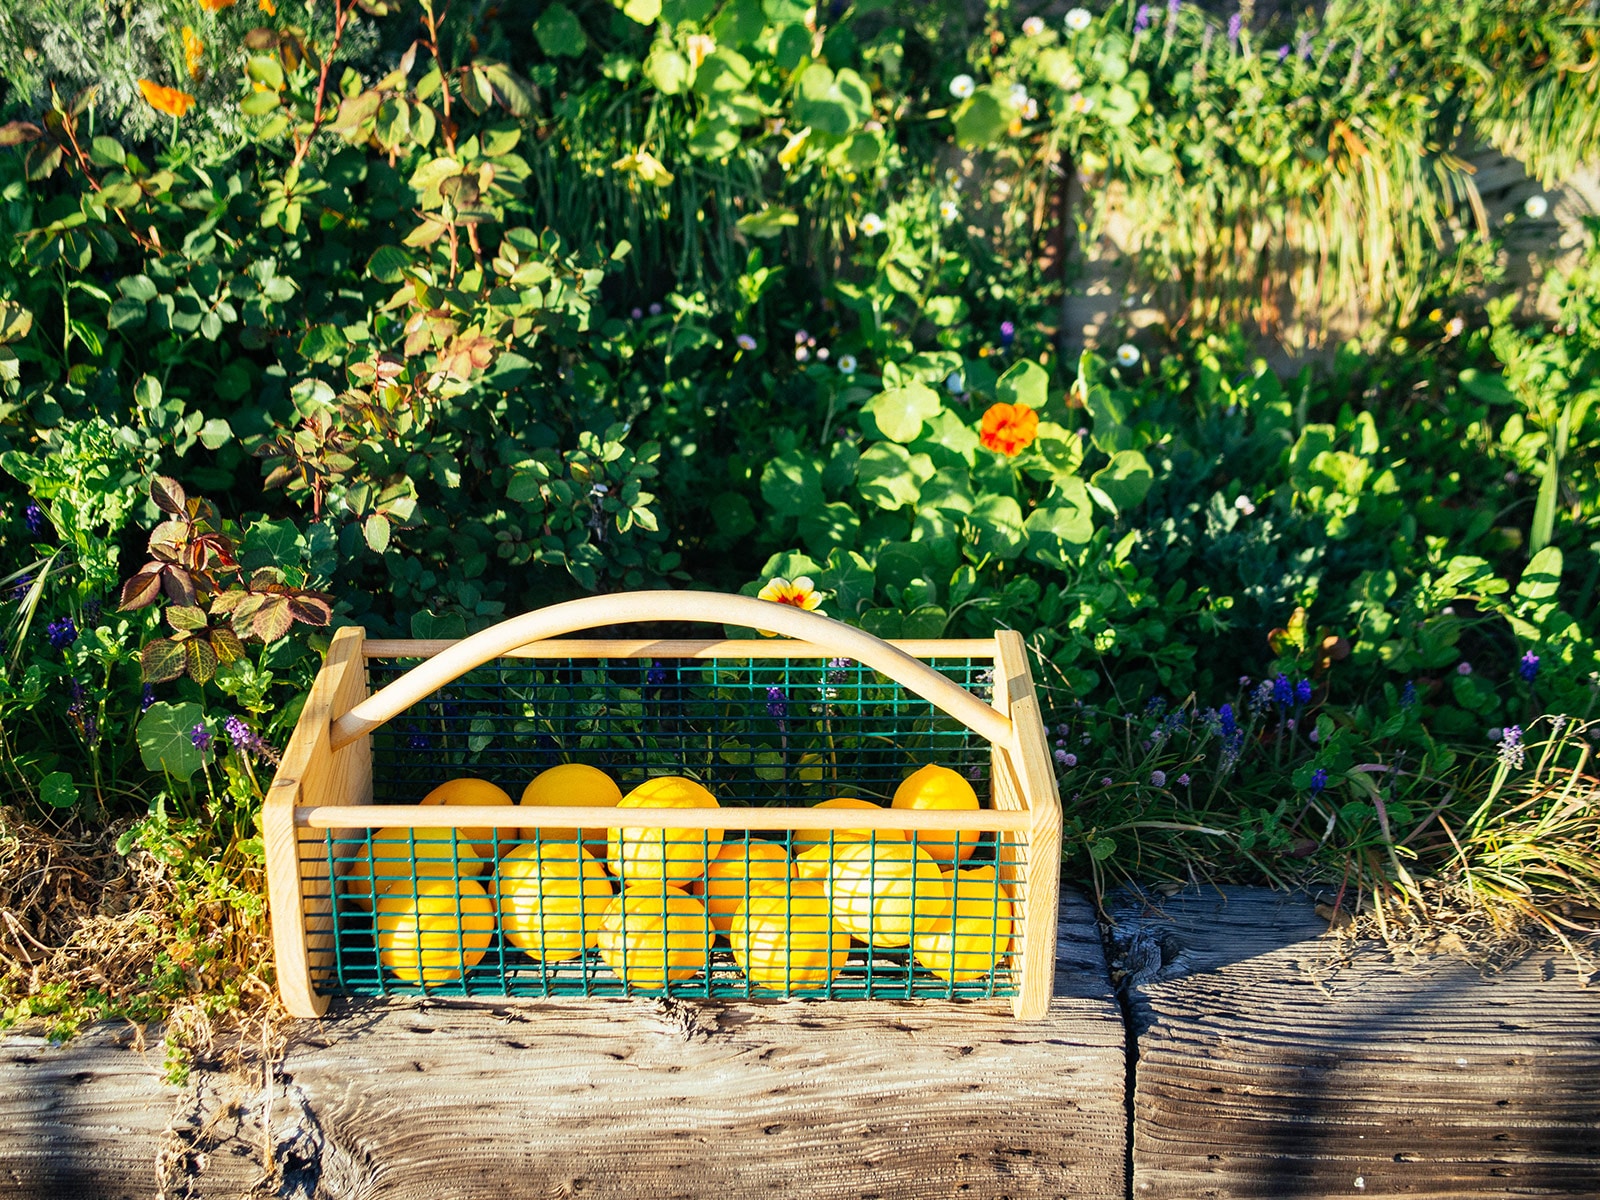 A wire basket filled with freshly picked lemons in a garden